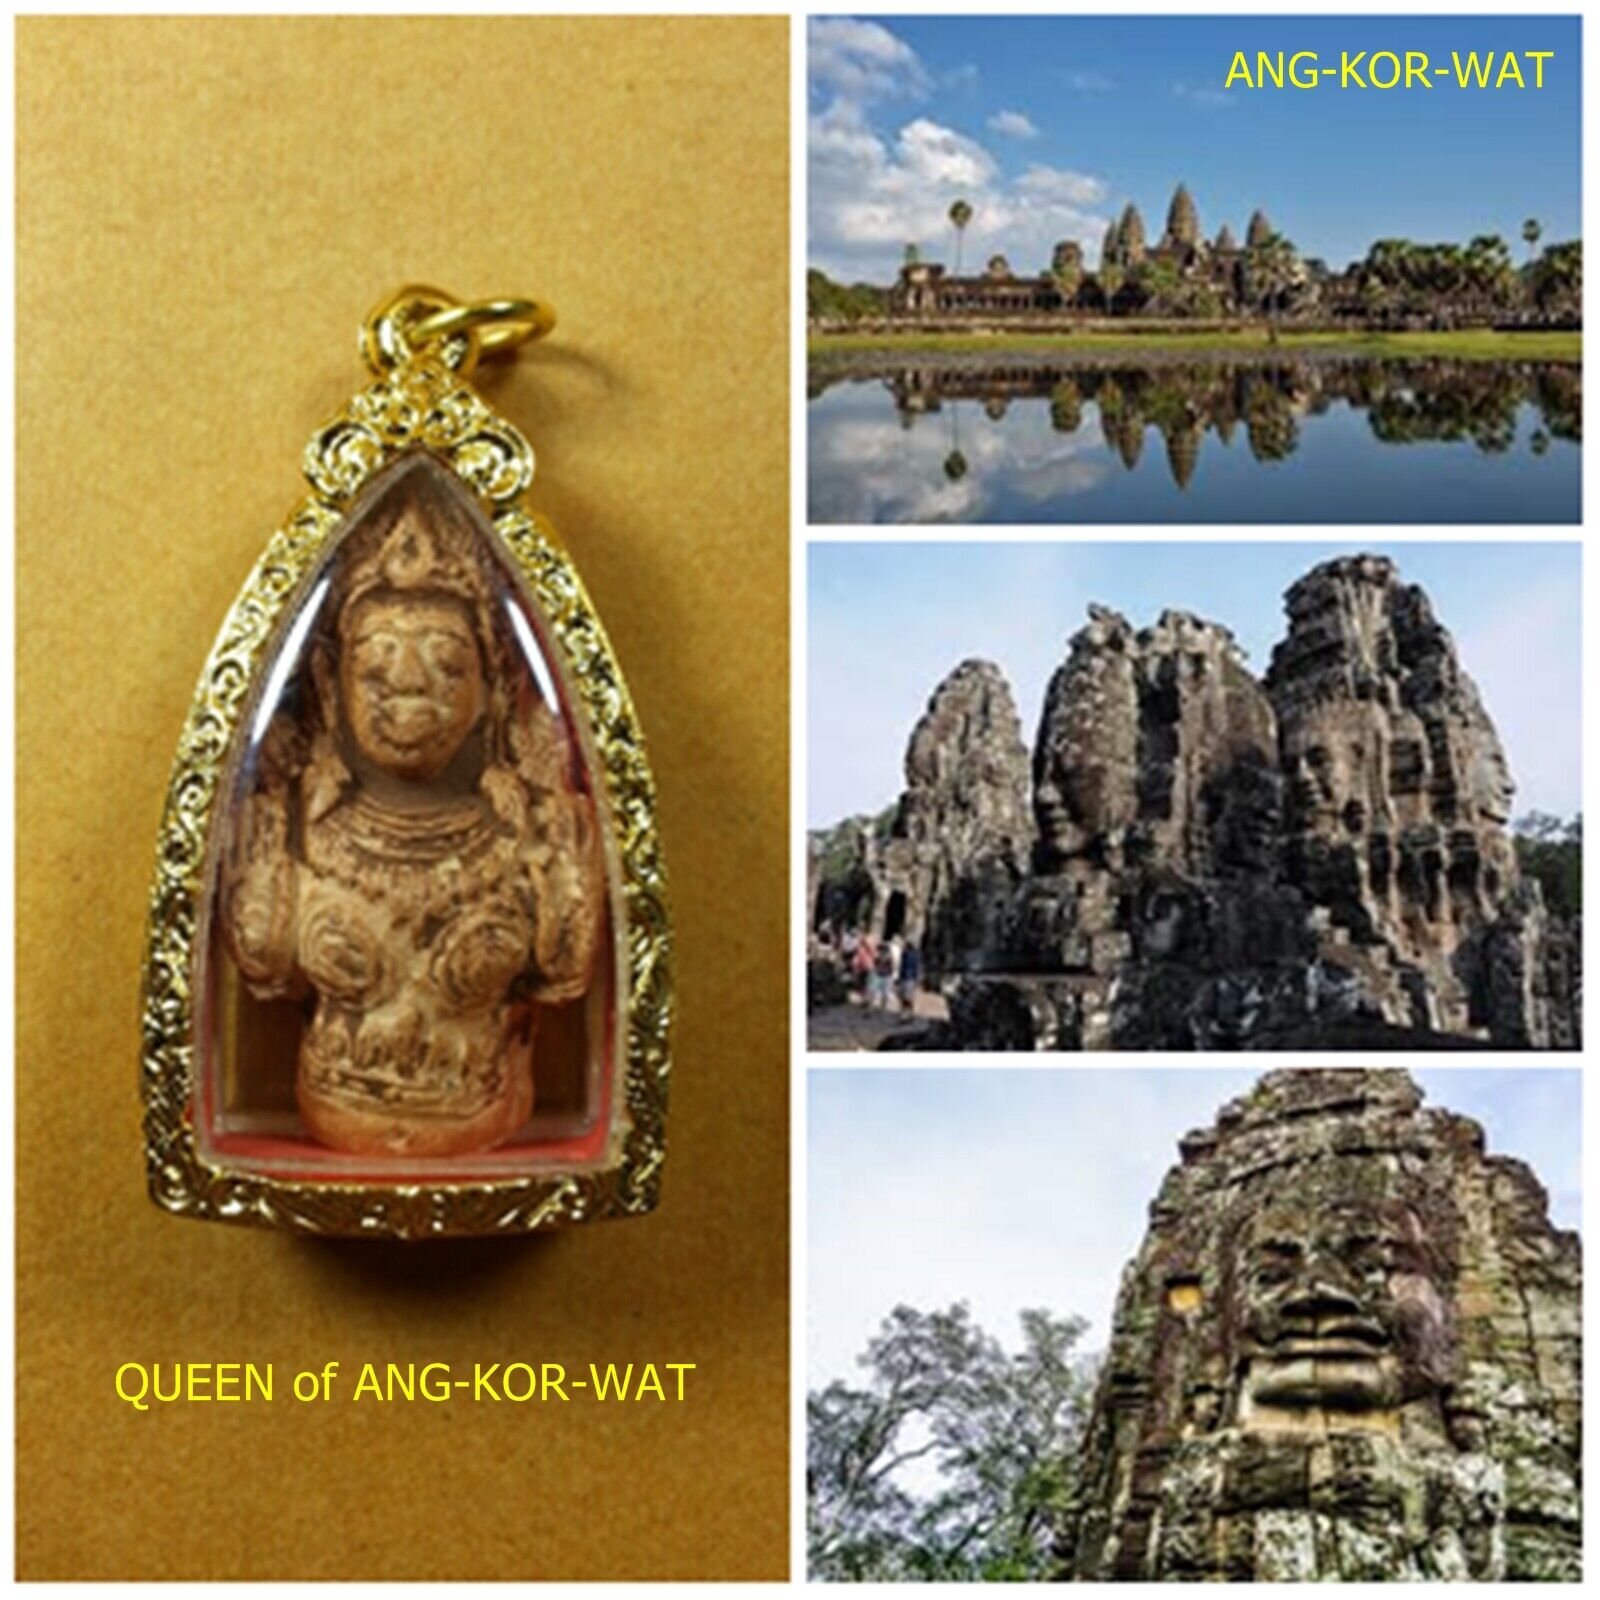 QUEEN of ANG-KOR-WAT ,TOP AMULET of THAILAND (of ASIA), Buddha Statue Pendant 